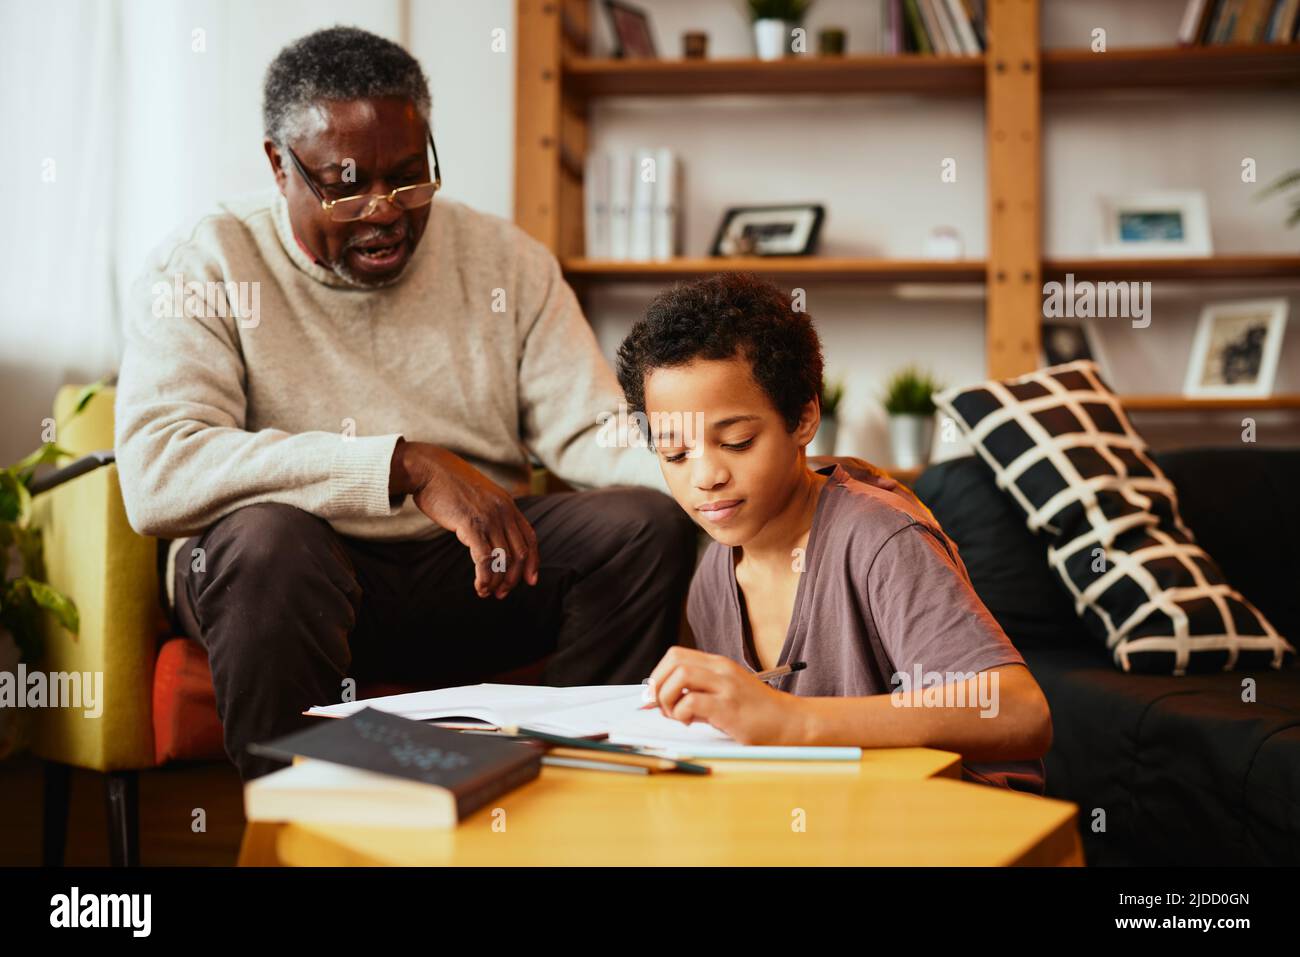 A grandfather looking at his grandchild's homework and checking on him at home. Stock Photo